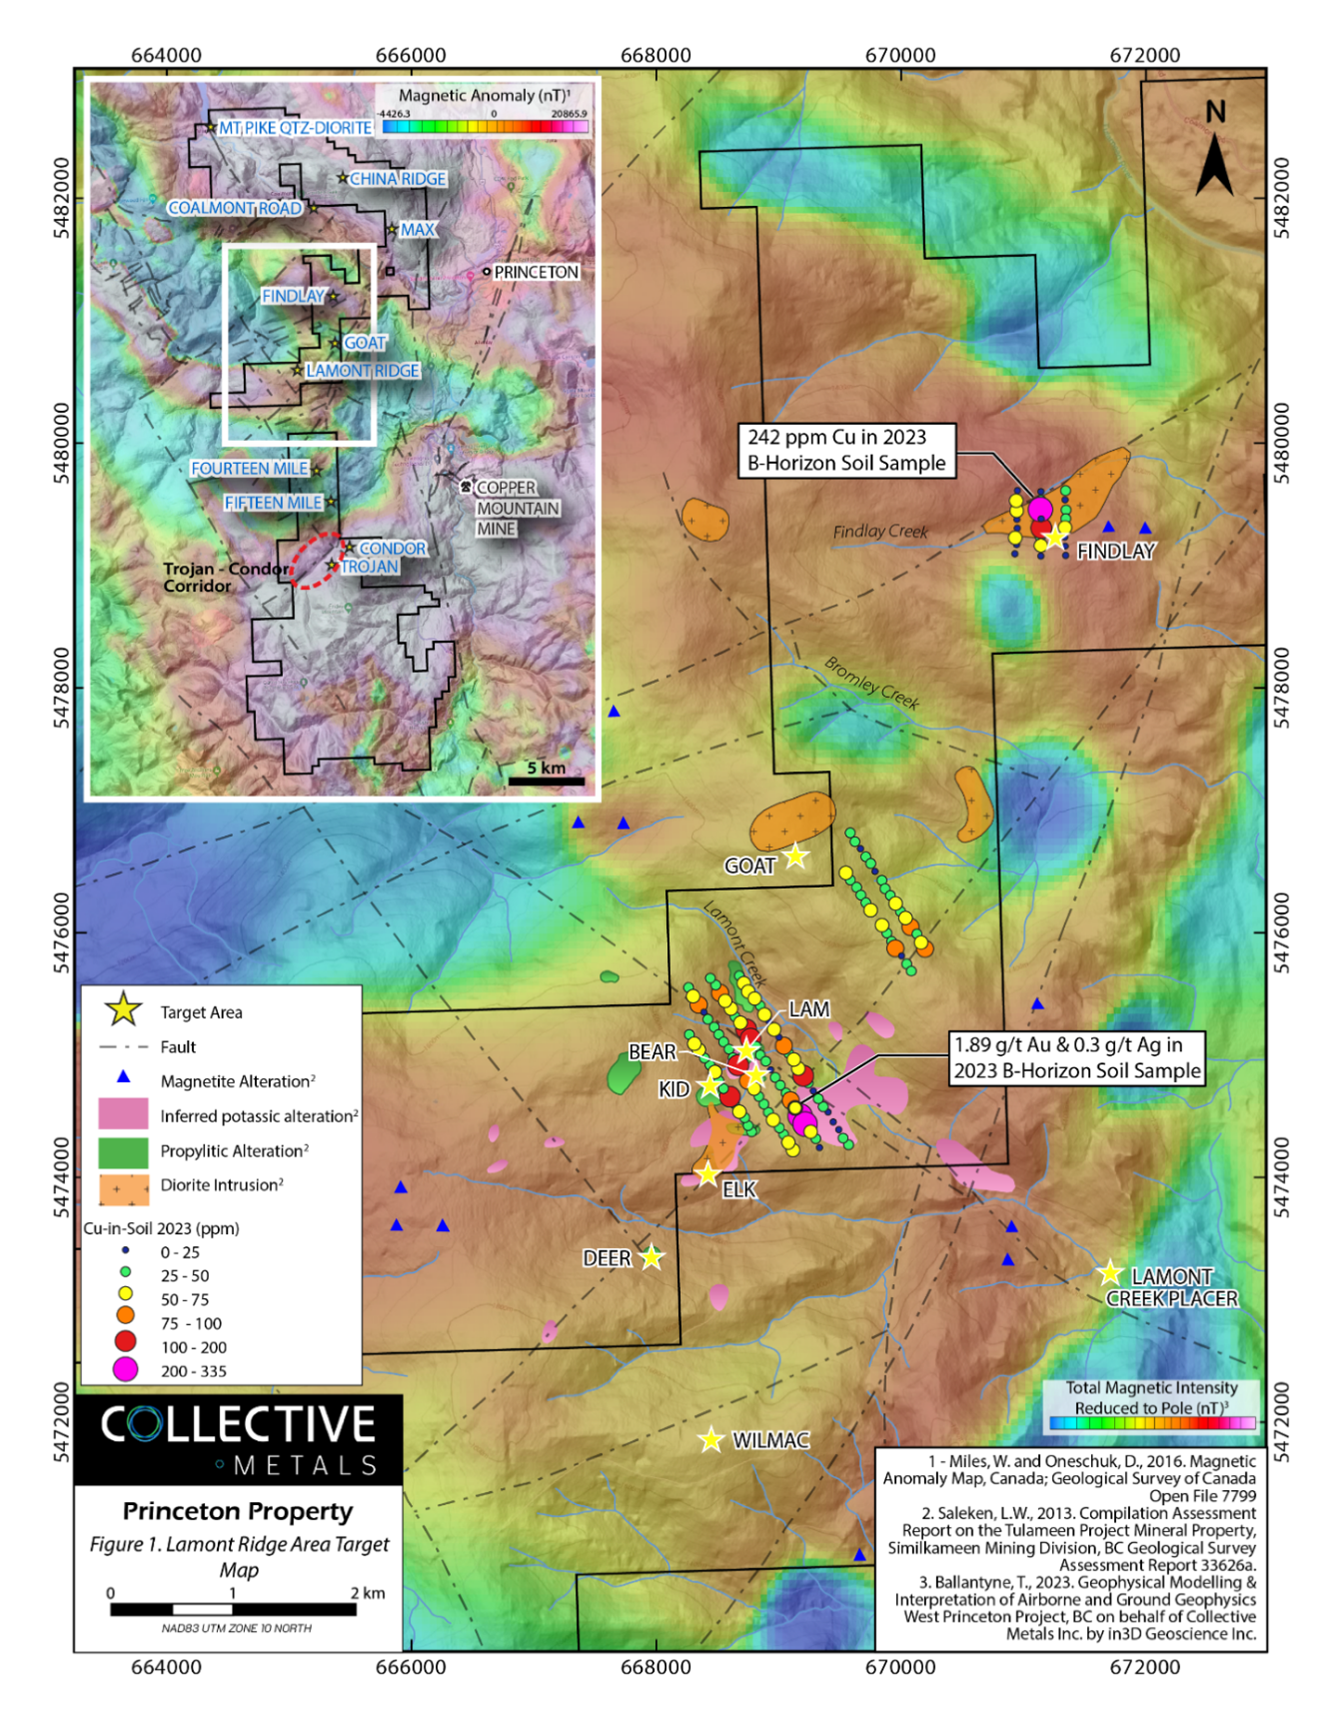 Lamont Ridge to Findlay Target Corridor with Aeromagnetic anomalies, propylitic and inferred potassic alteration, diorite intrusions, and 2023 soil geochemical results for copper